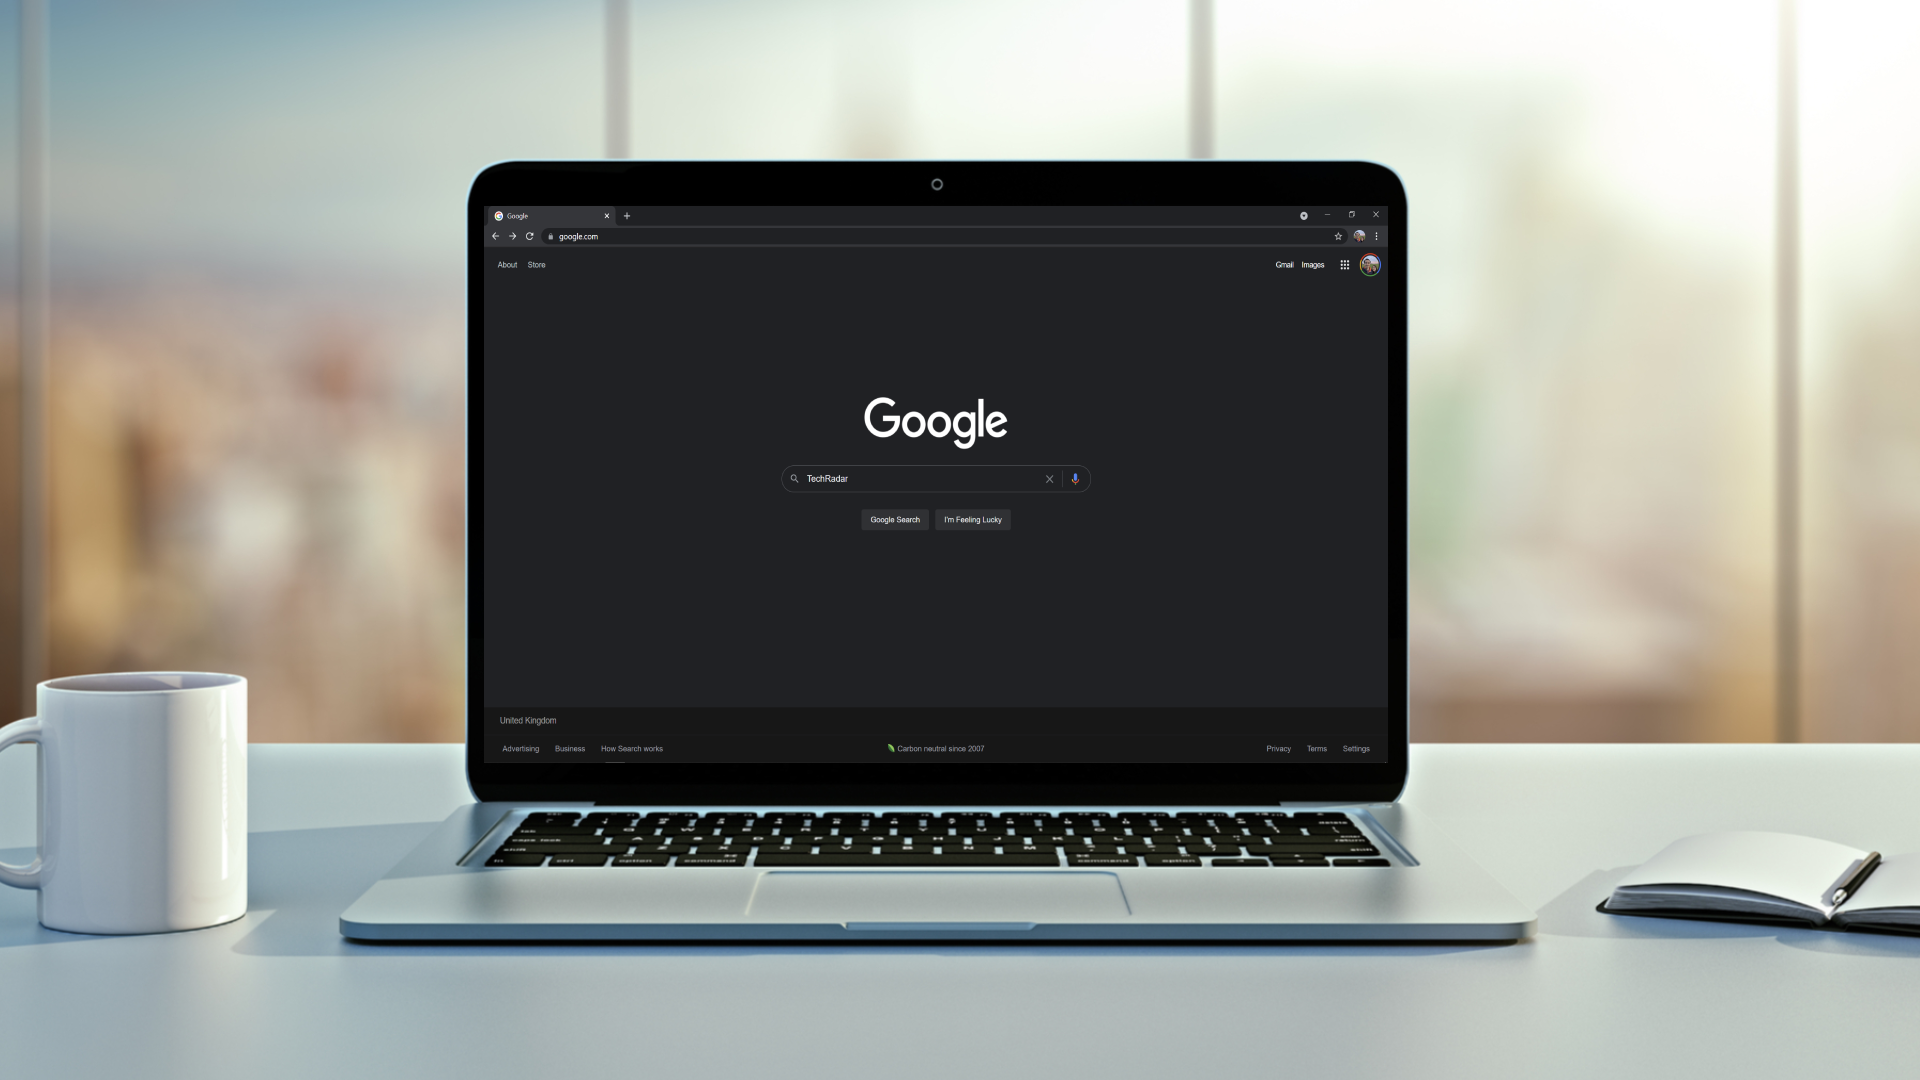 google-search-full-dark-mode-is-starting-to-roll-out-for-some-users